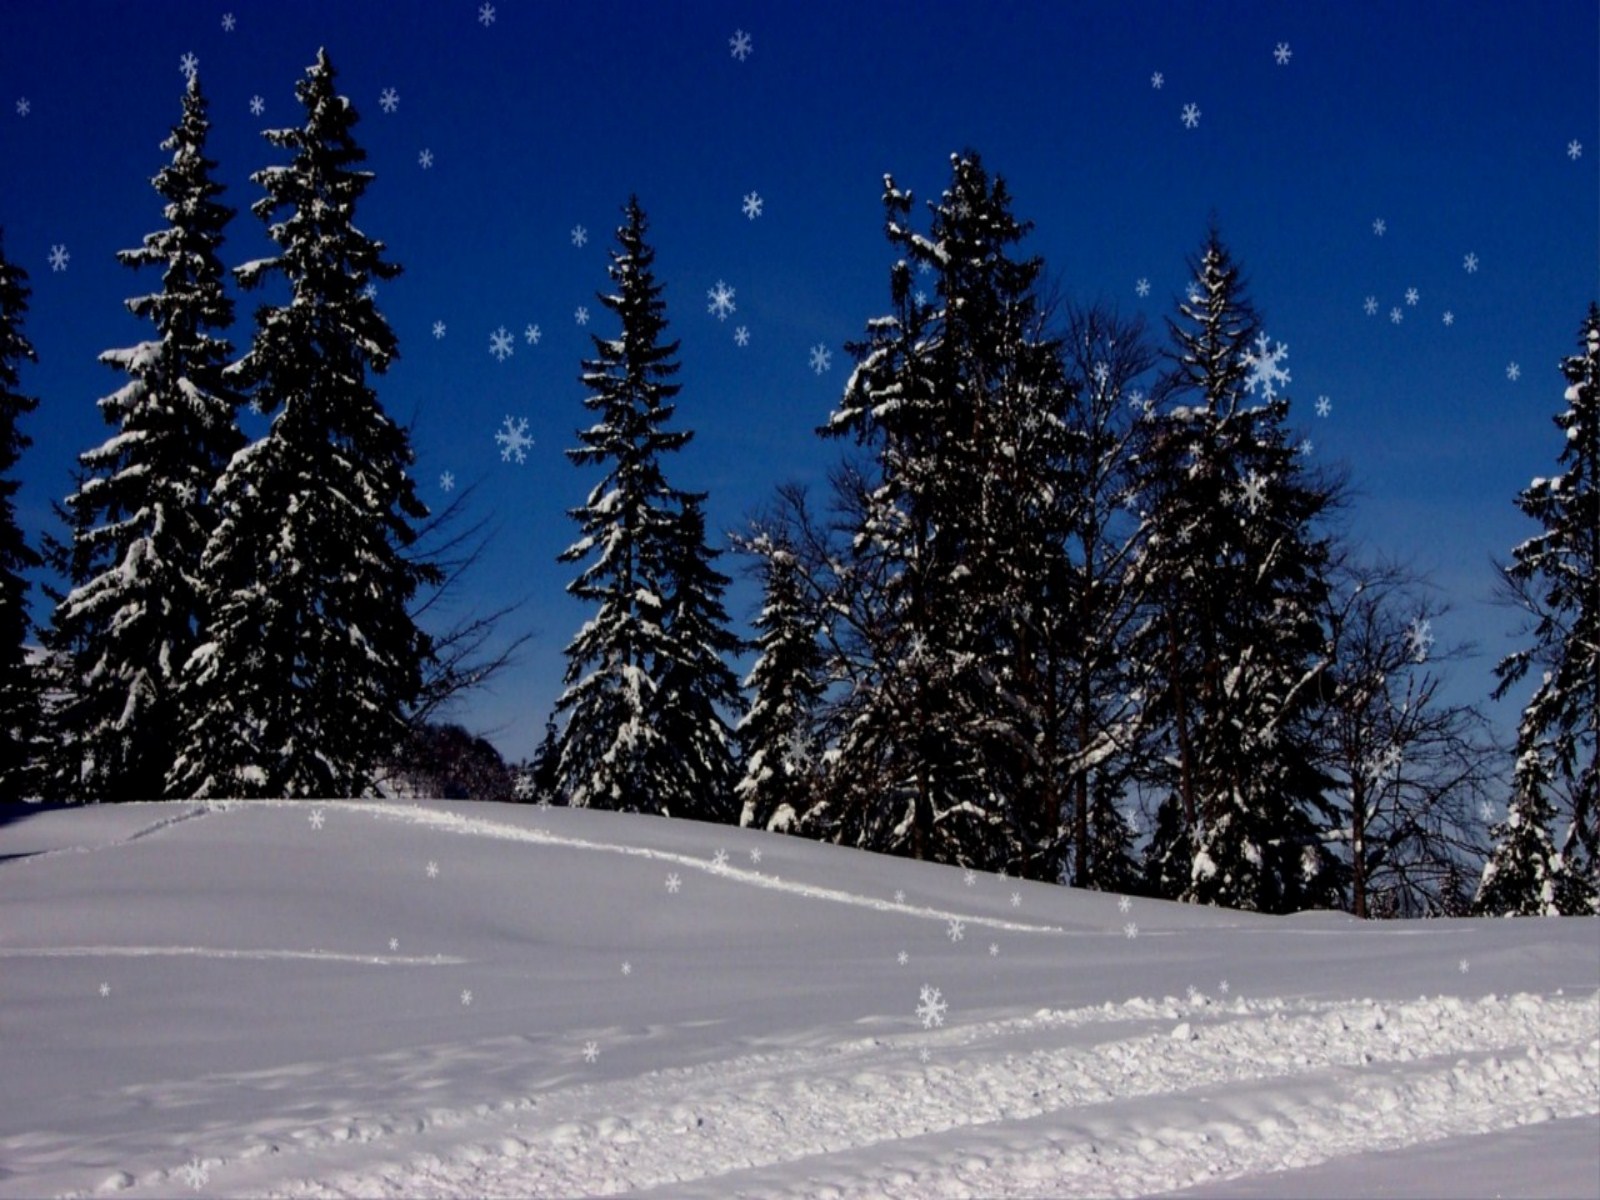 Related Pictures Snow Falling Pale Animated Gif Repeating Background